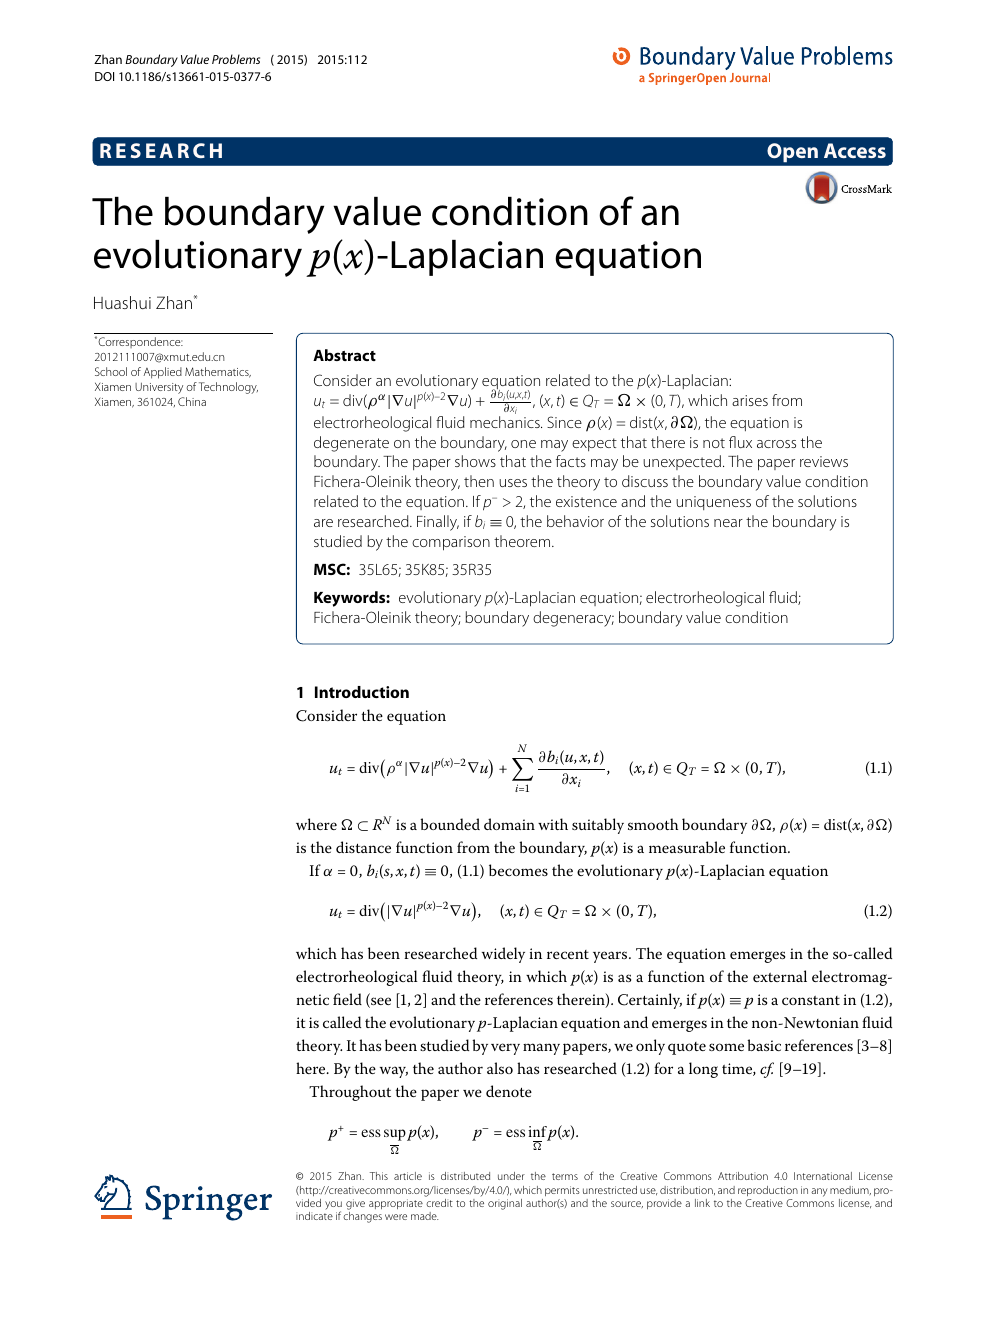 The Boundary Value Condition Of An Evolutionary P X P X Laplacian Equation Topic Of Research Paper In Mathematics Download Scholarly Article Pdf And Read For Free On Cyberleninka Open